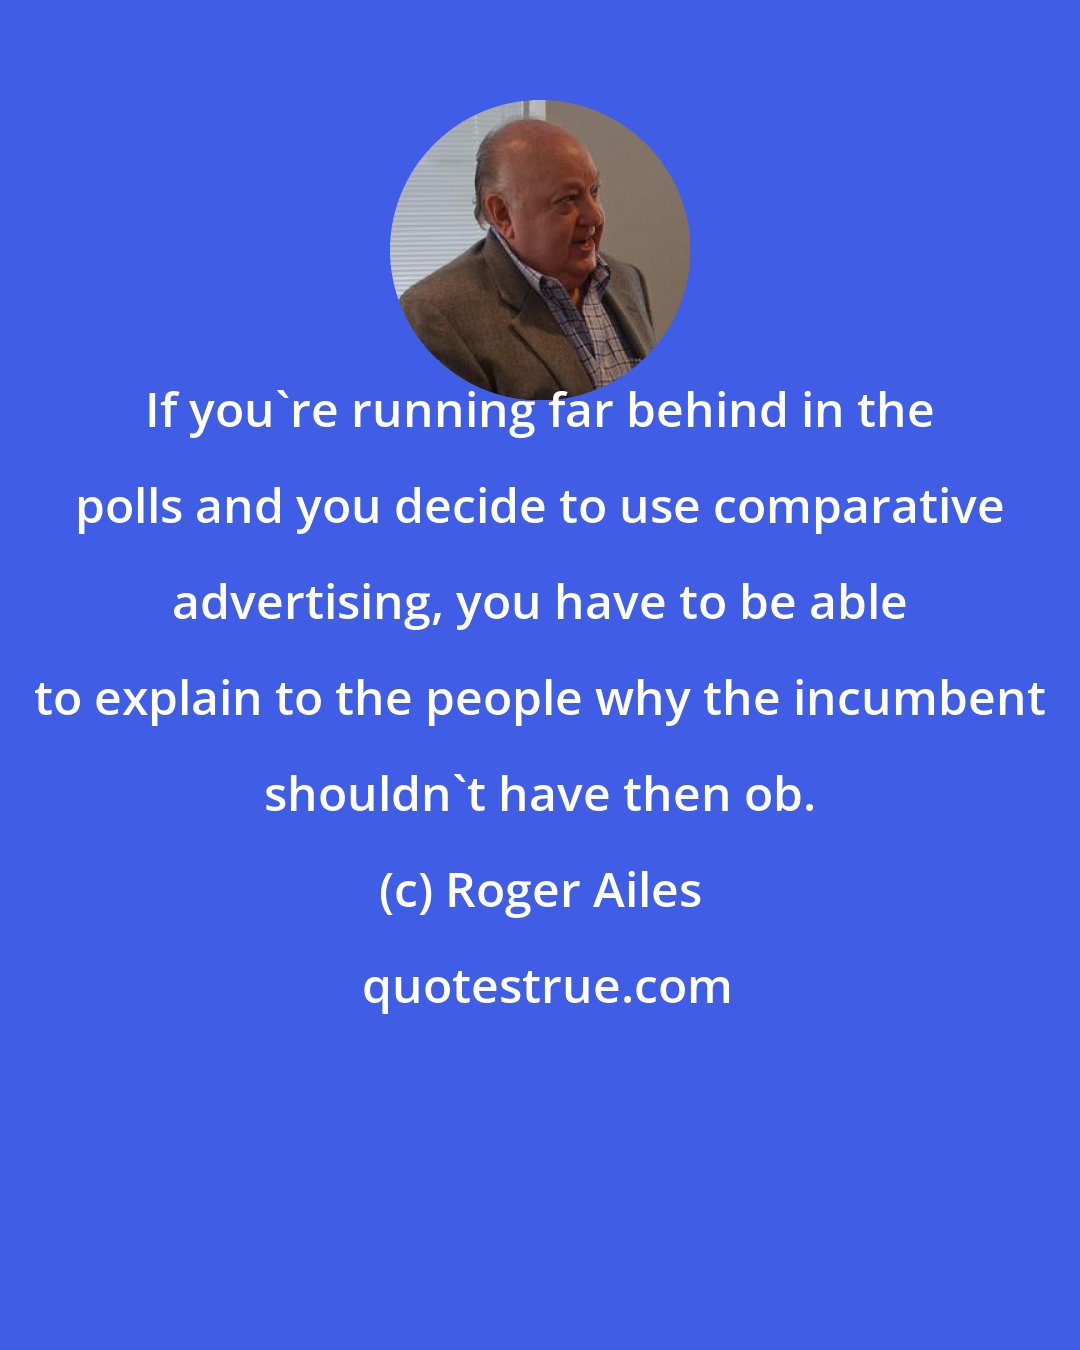 Roger Ailes: If you're running far behind in the polls and you decide to use comparative advertising, you have to be able to explain to the people why the incumbent shouldn't have then ob.